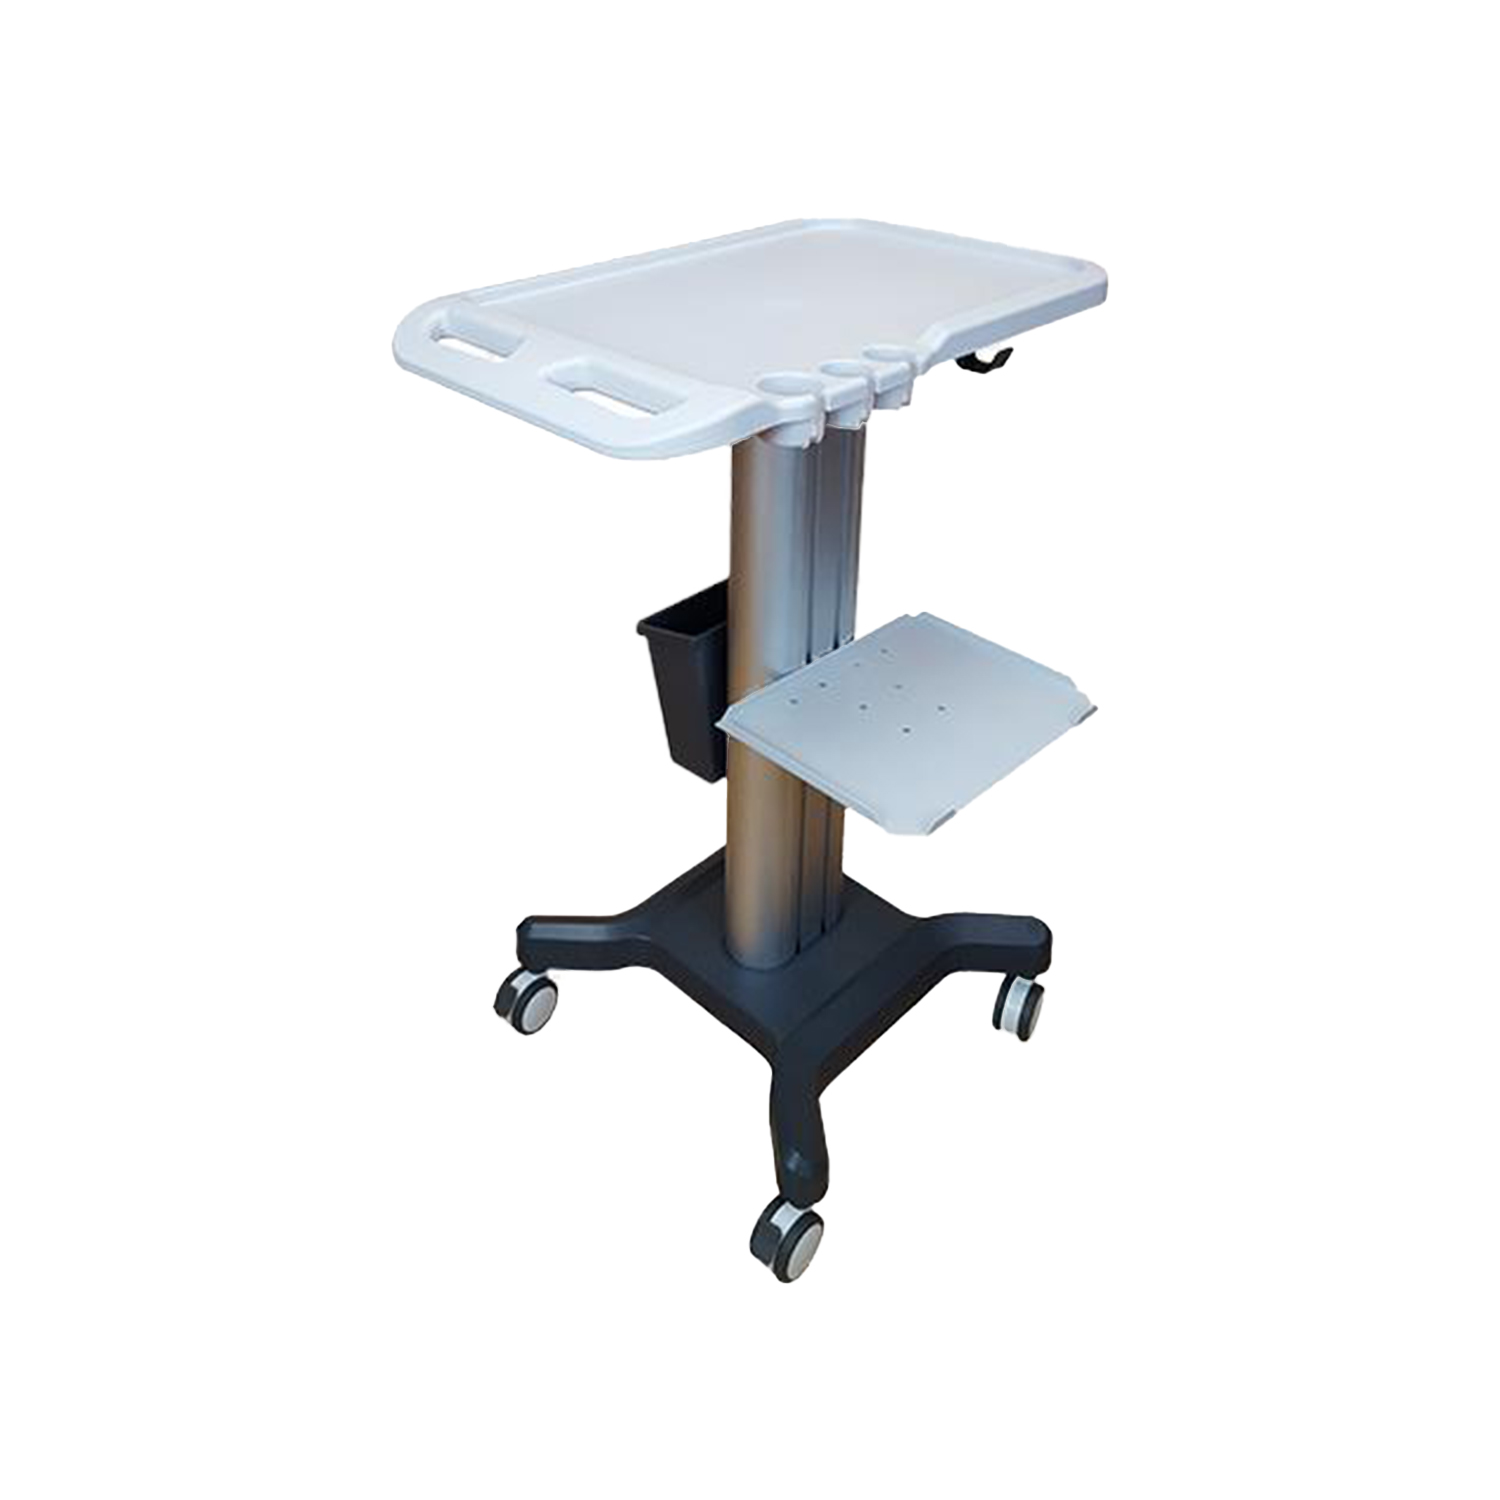 Medical Mobile Cart With Shelf For Portable Ultrasound - 43 inches